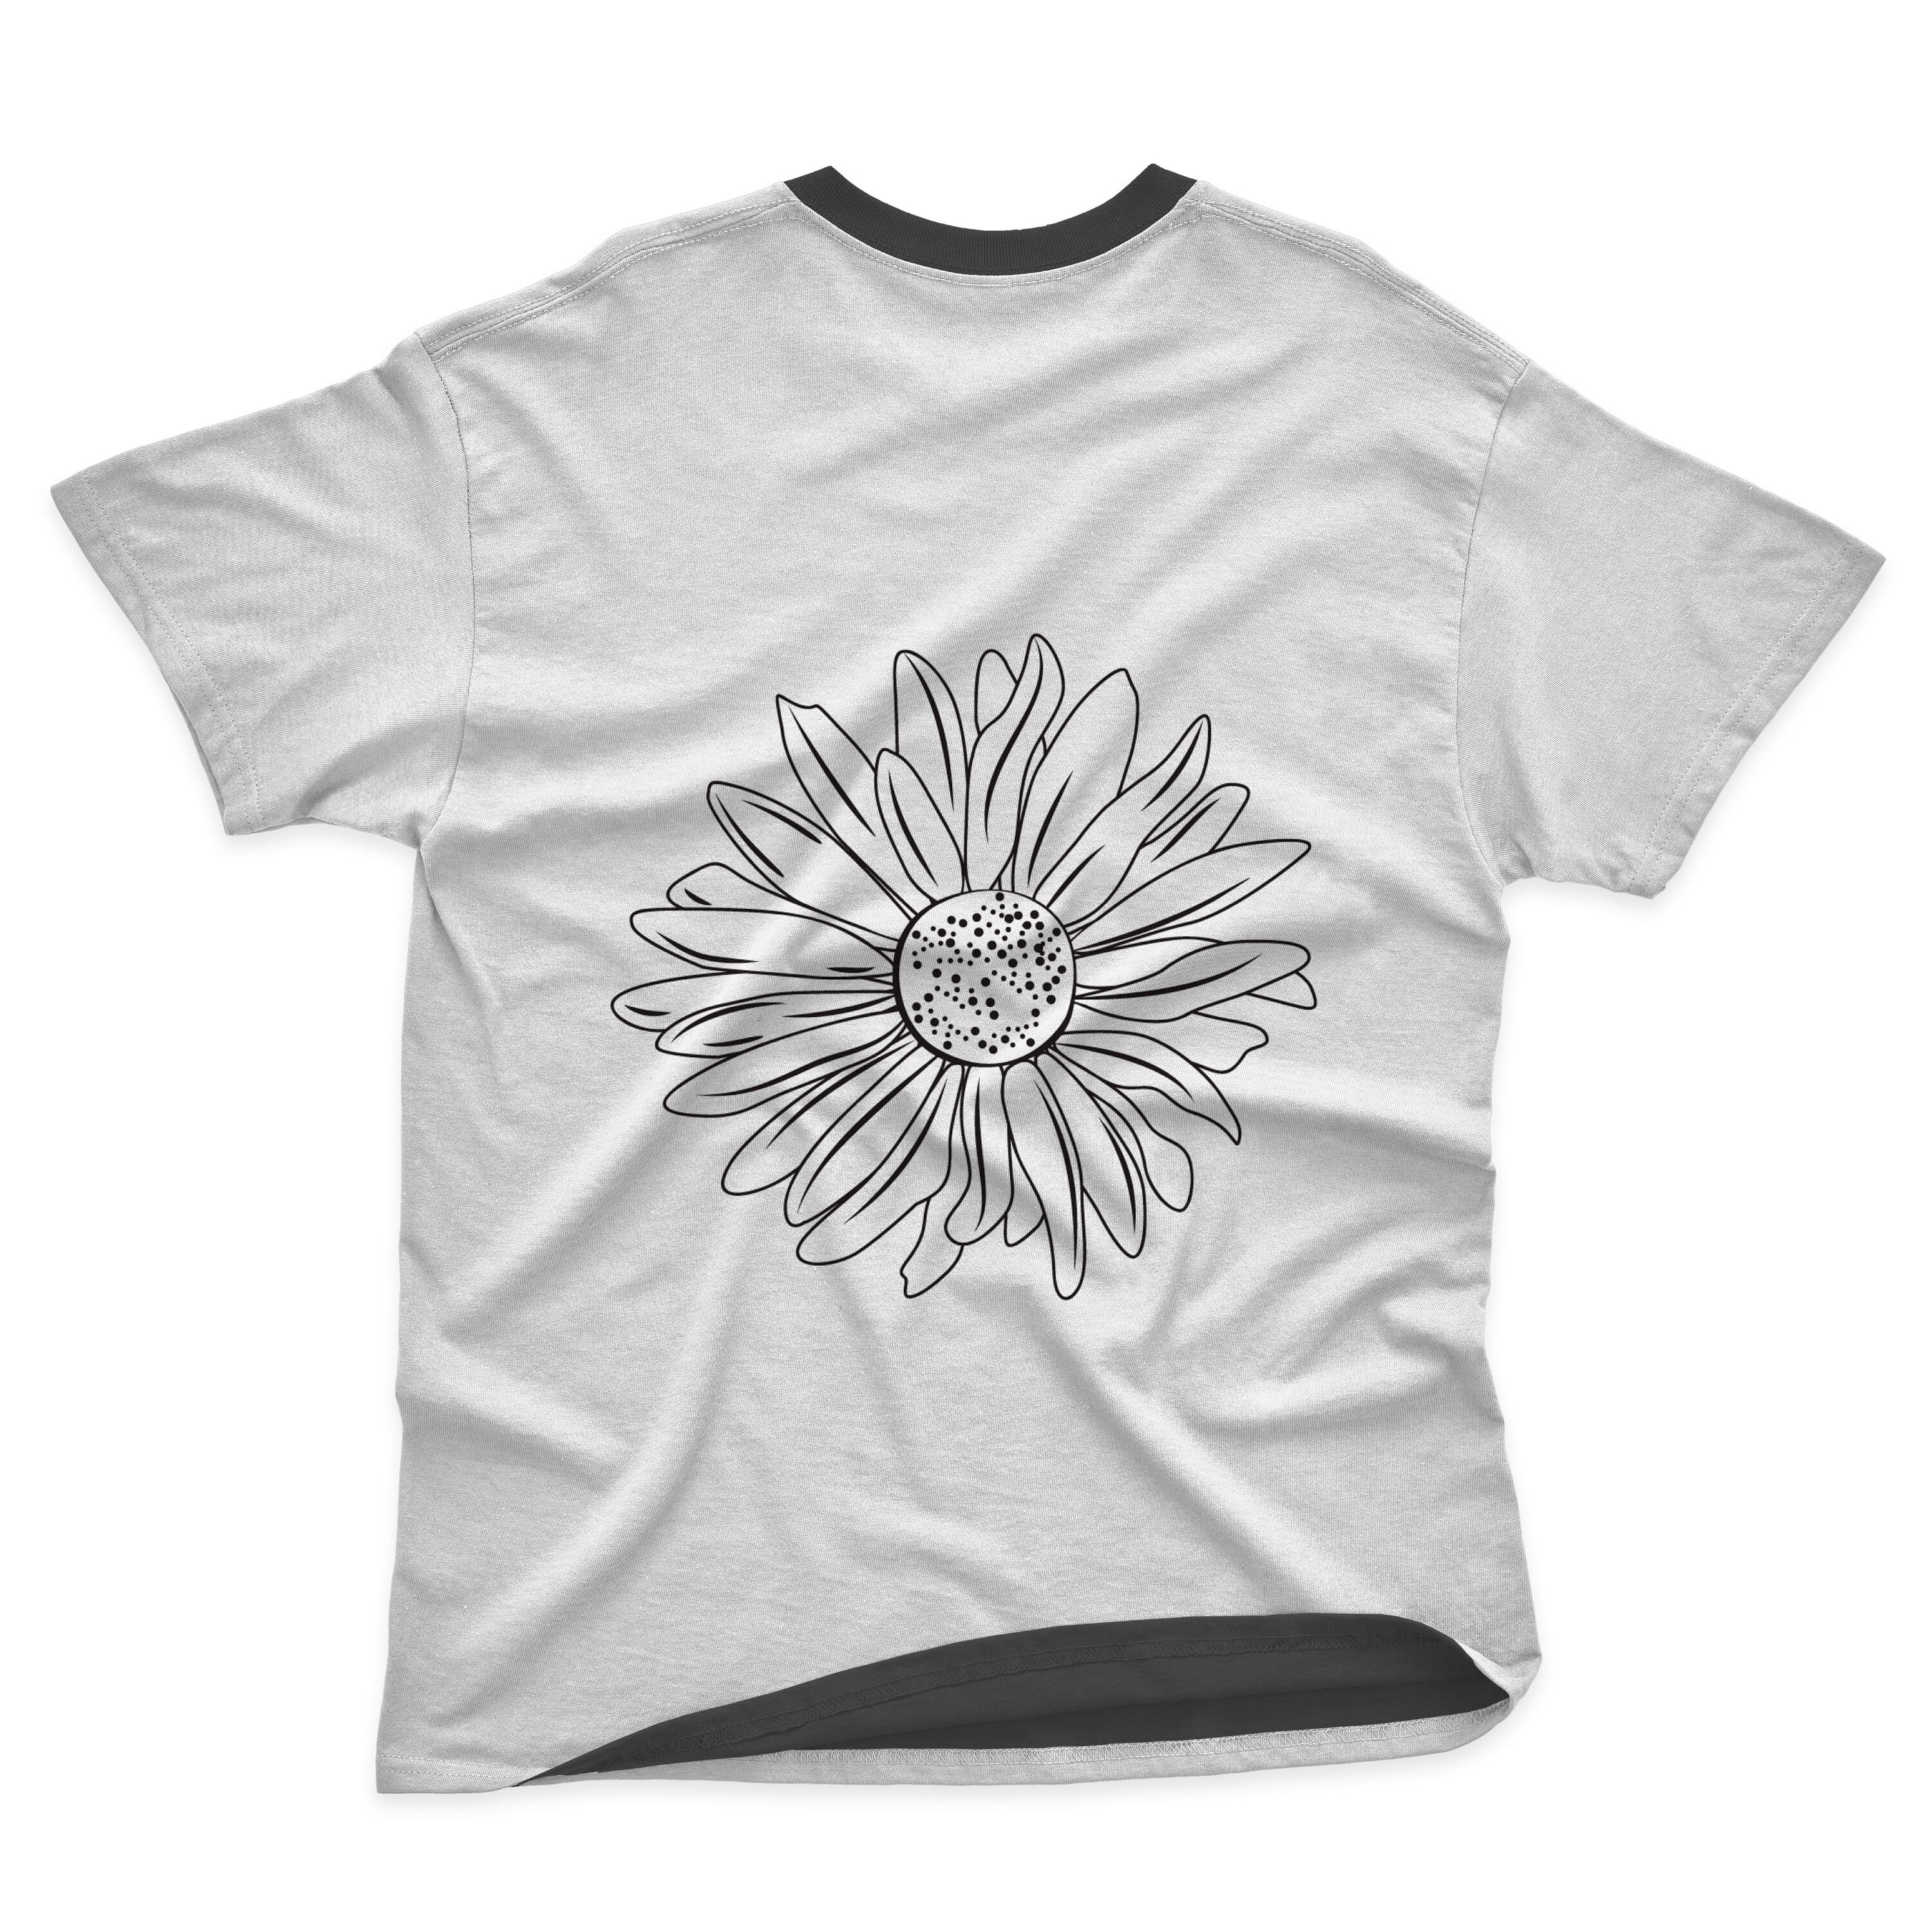 Outlined daisy printed on the t-shirt.